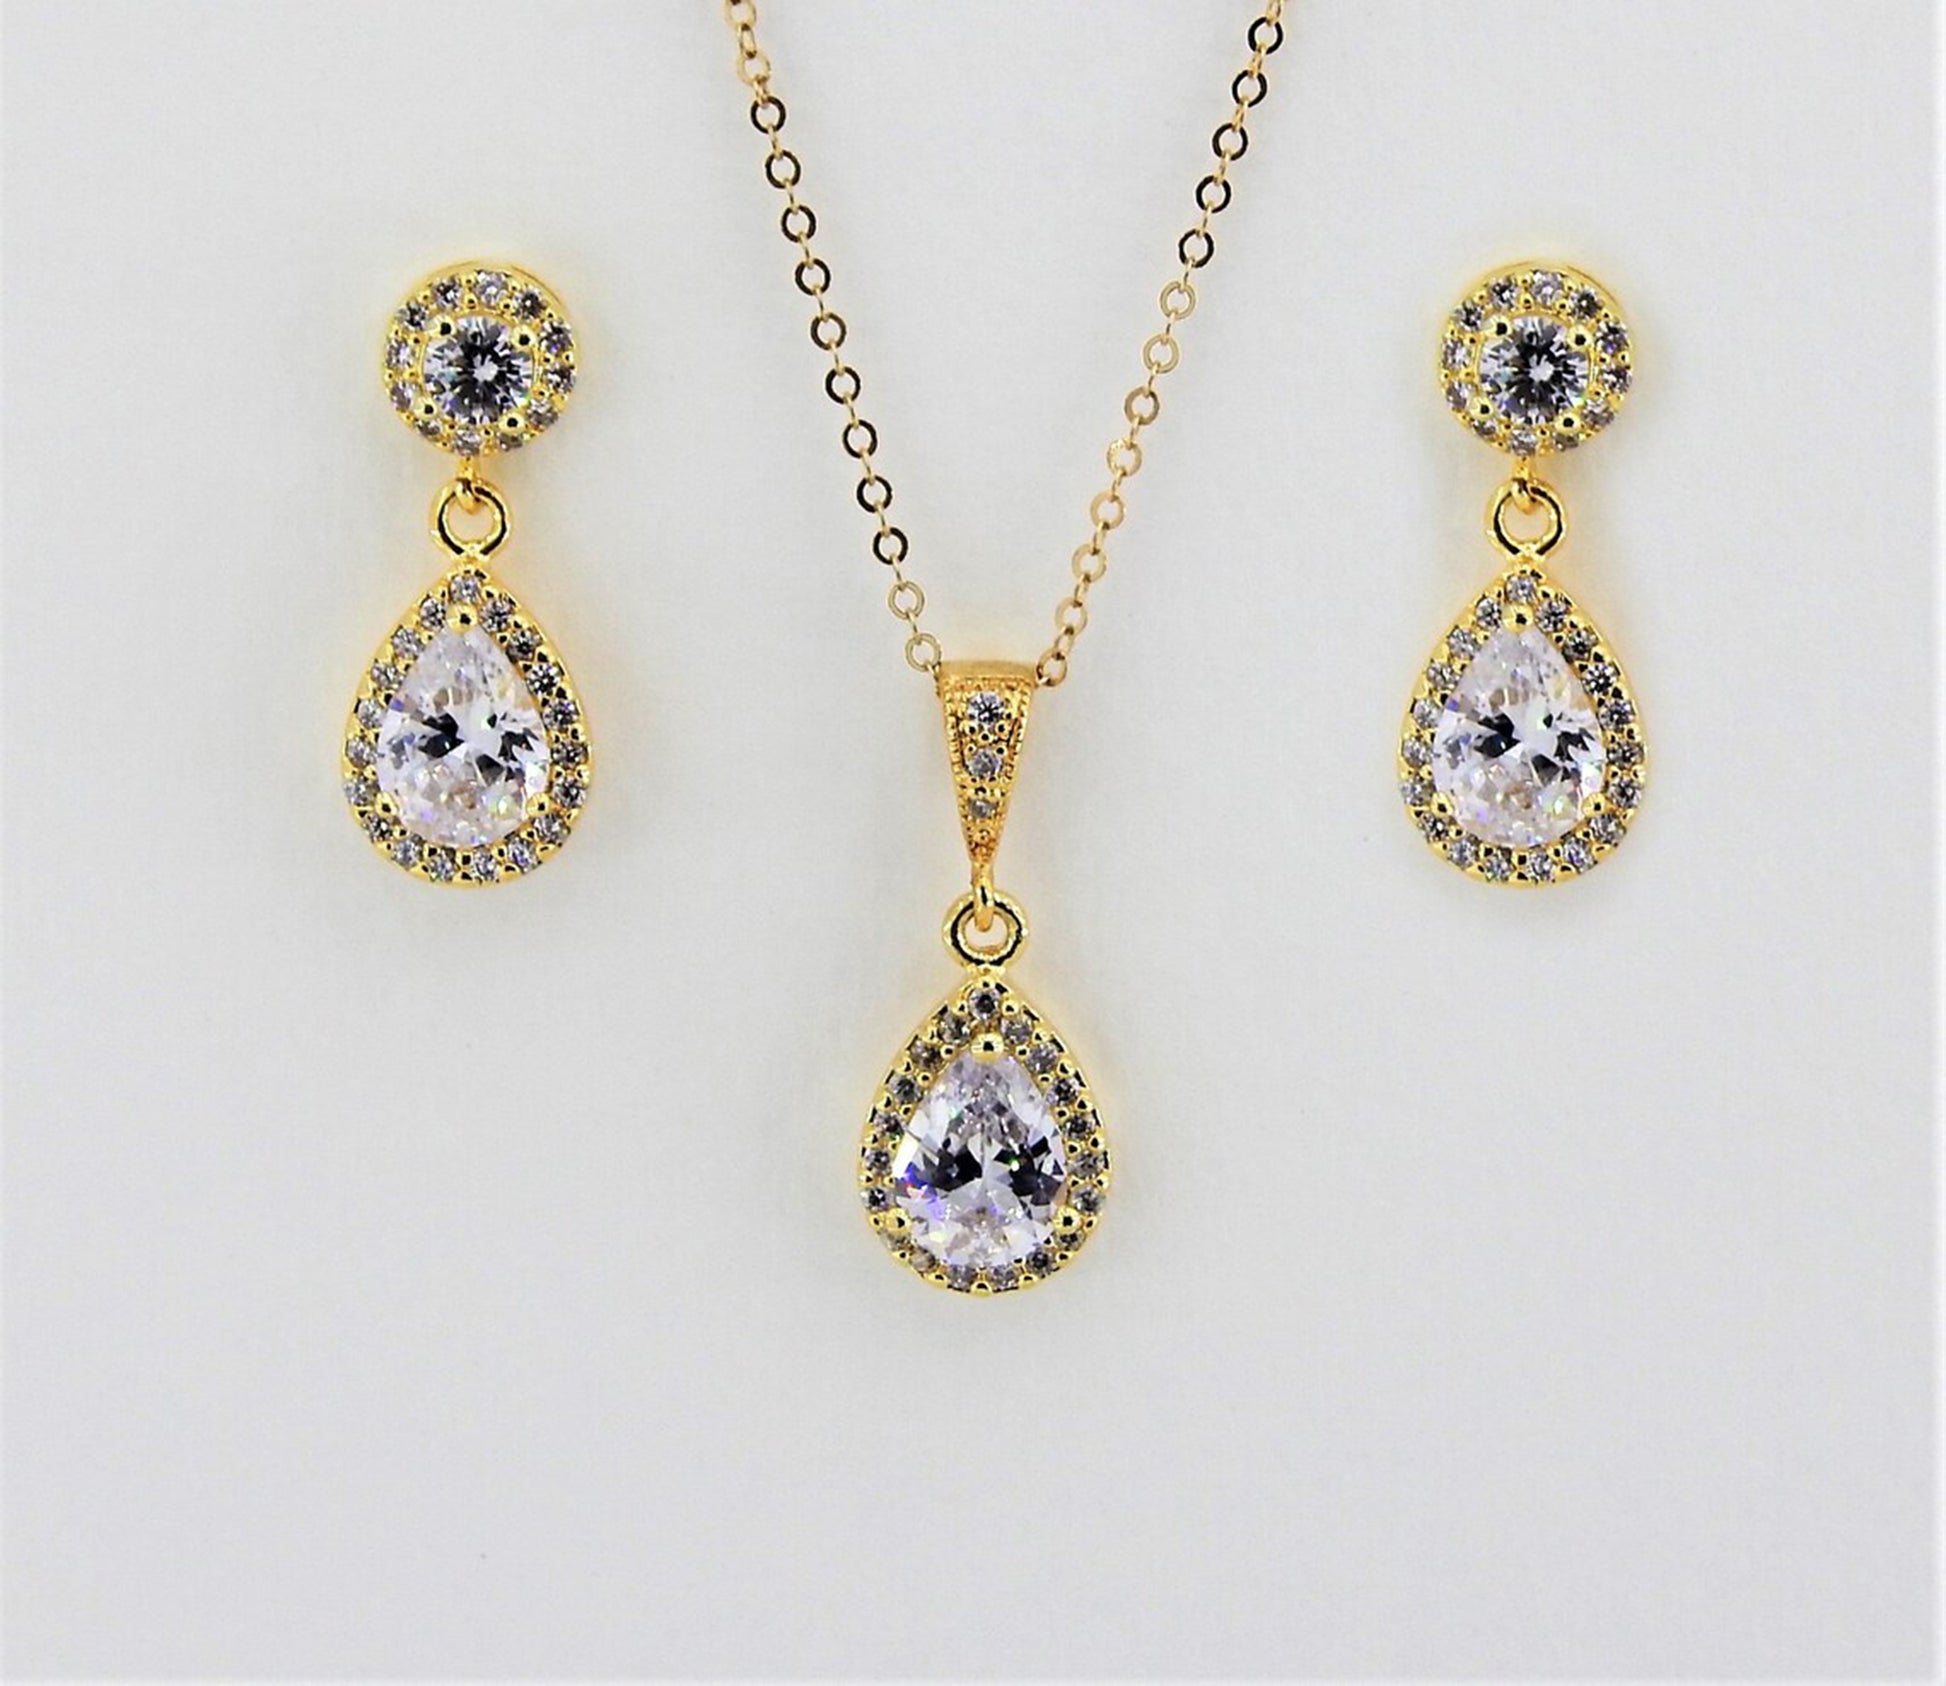 Gold filled earring and necklace set with teardrop diamond surrounded by many tiny cubic zirconias are displayed against a plain white background.